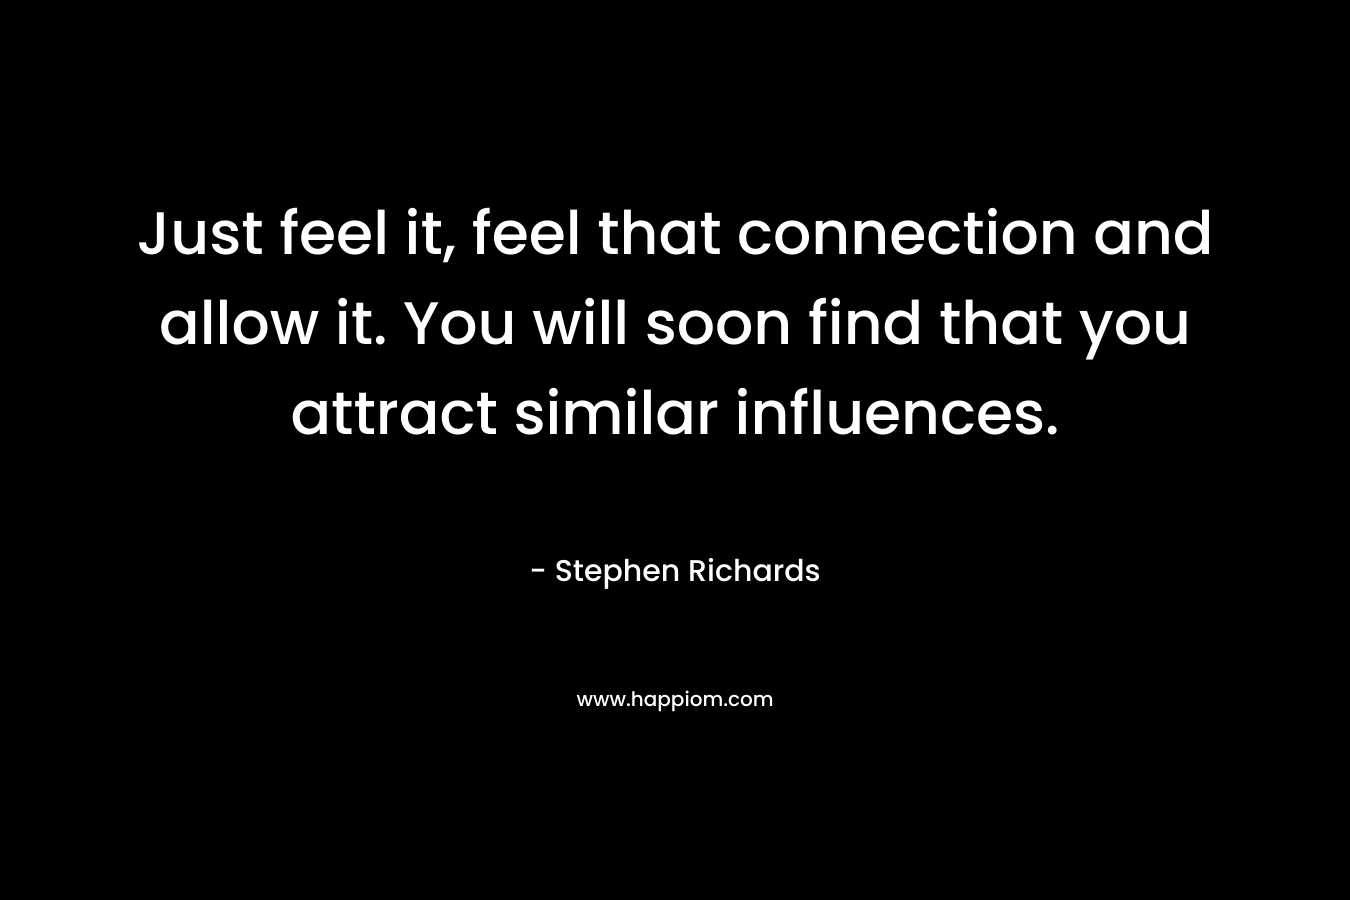 Just feel it, feel that connection and allow it. You will soon find that you attract similar influences. – Stephen Richards